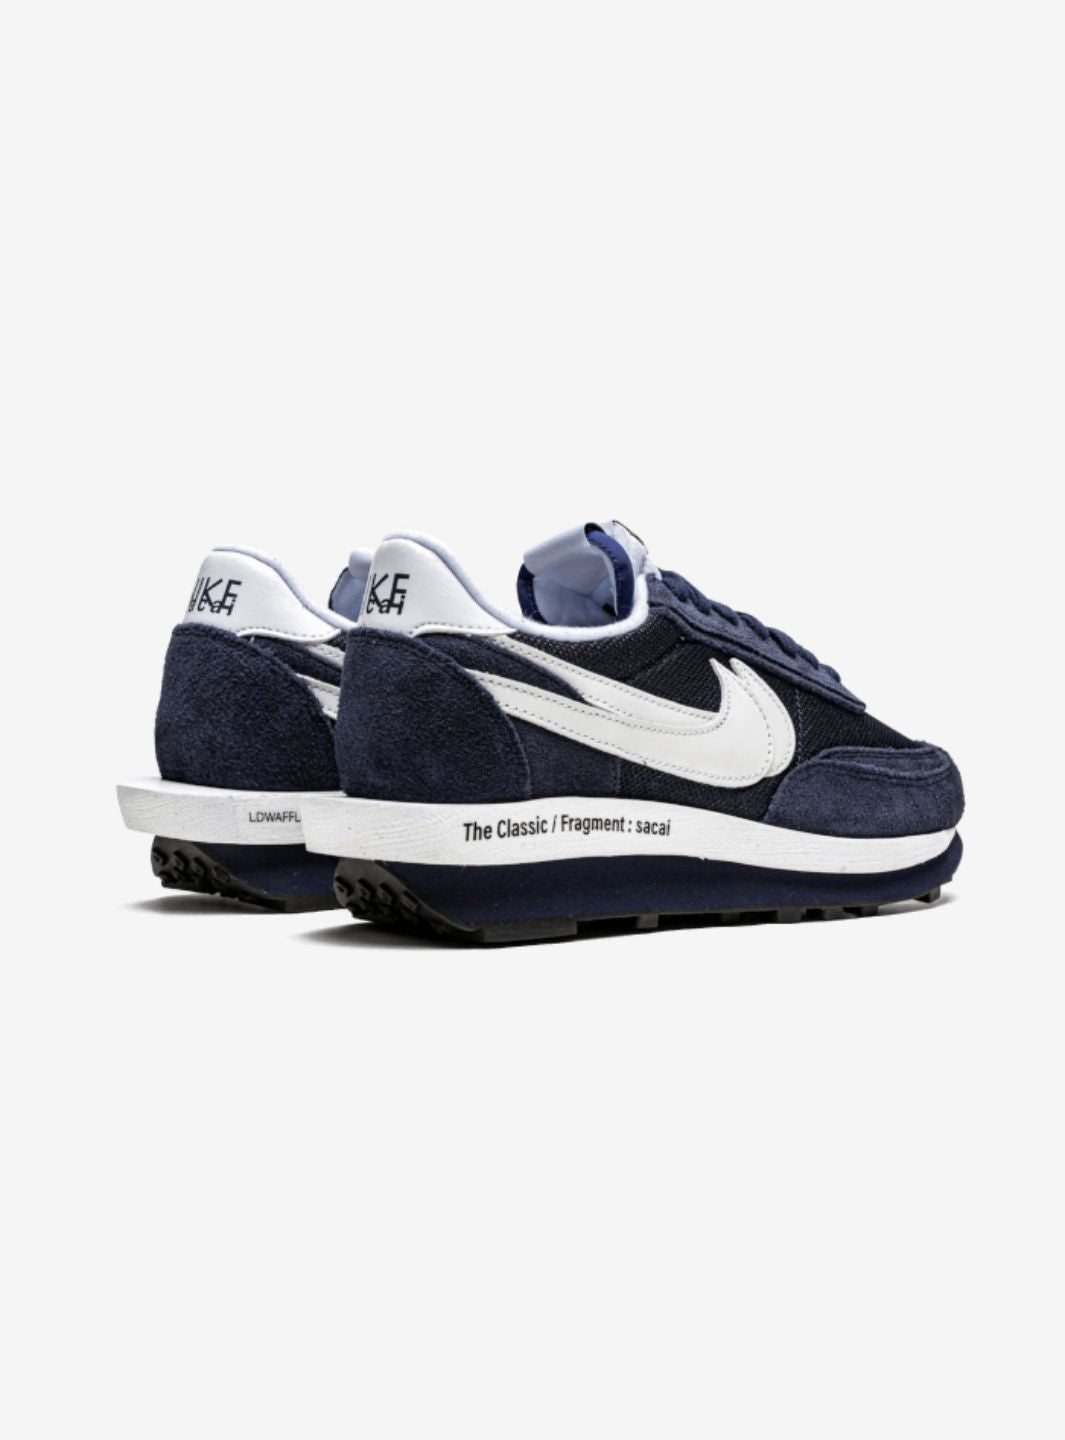 Nike LD Waffle SF Sacai Fragment Blue Void - DH2684-400 | ResellZone